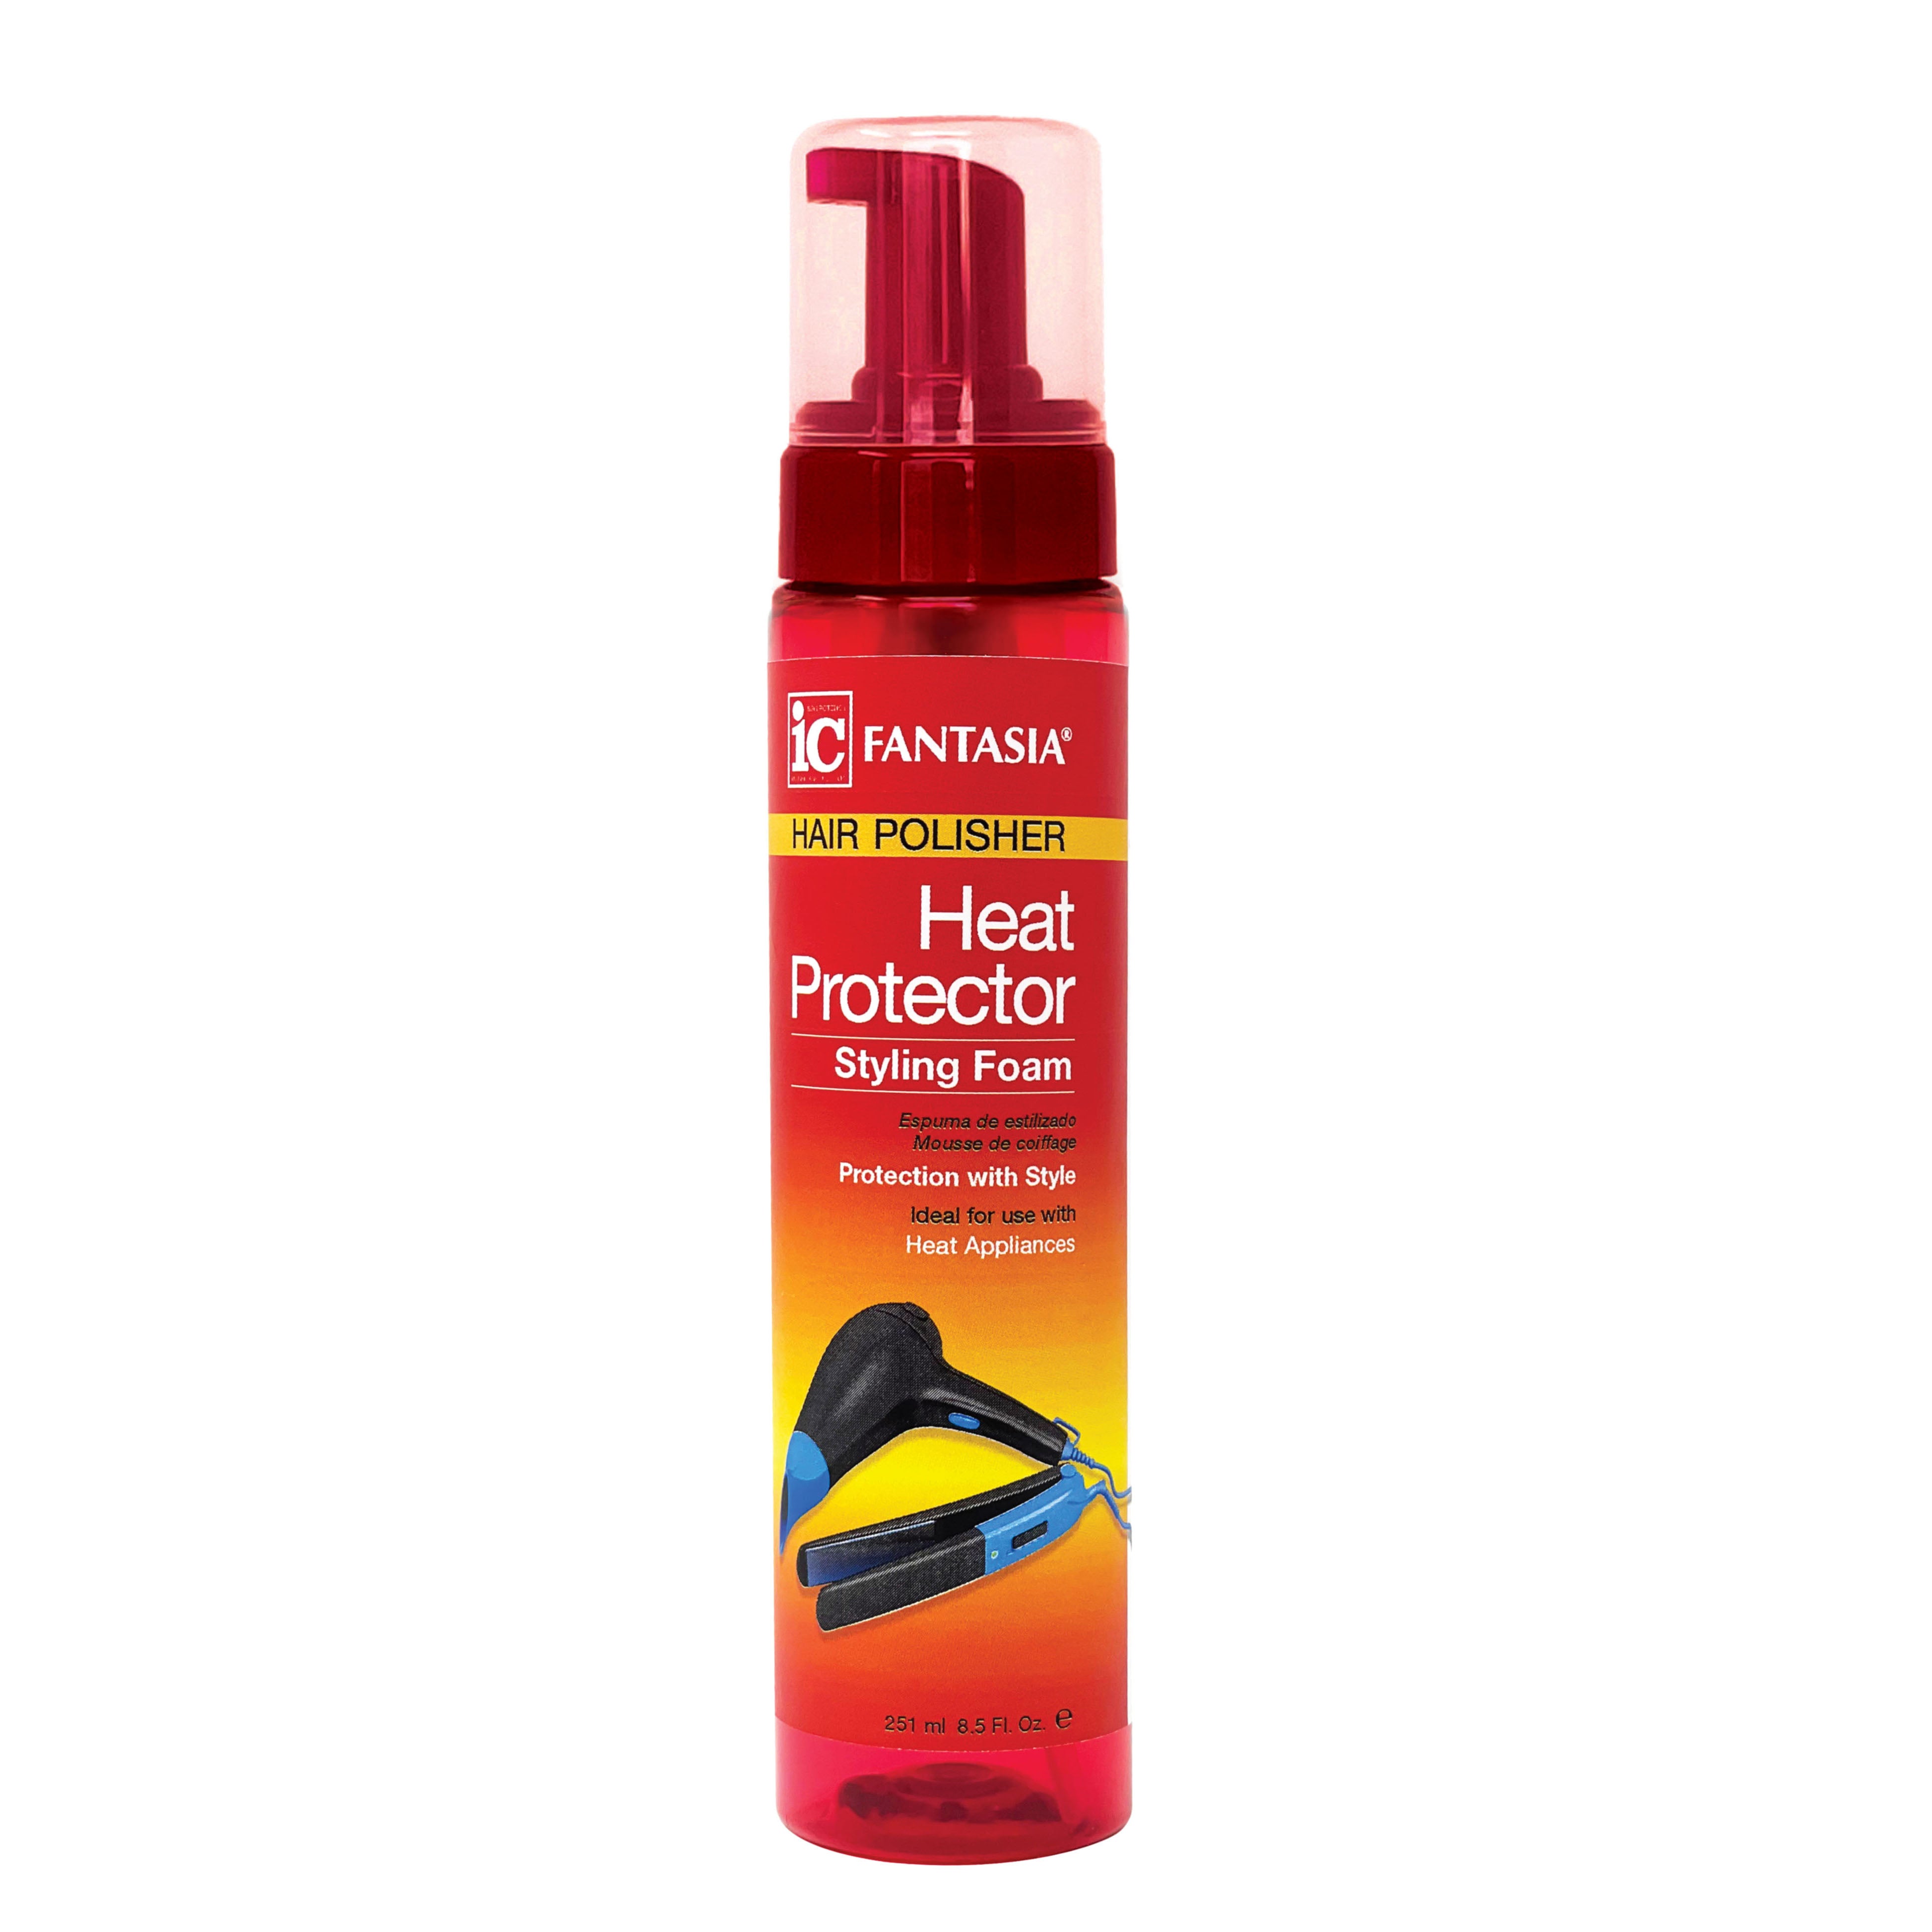 HEAT PROTECTOR FOAM – Hair Care NEW! Industries - (8.5 Fantasia OZ) STYLING